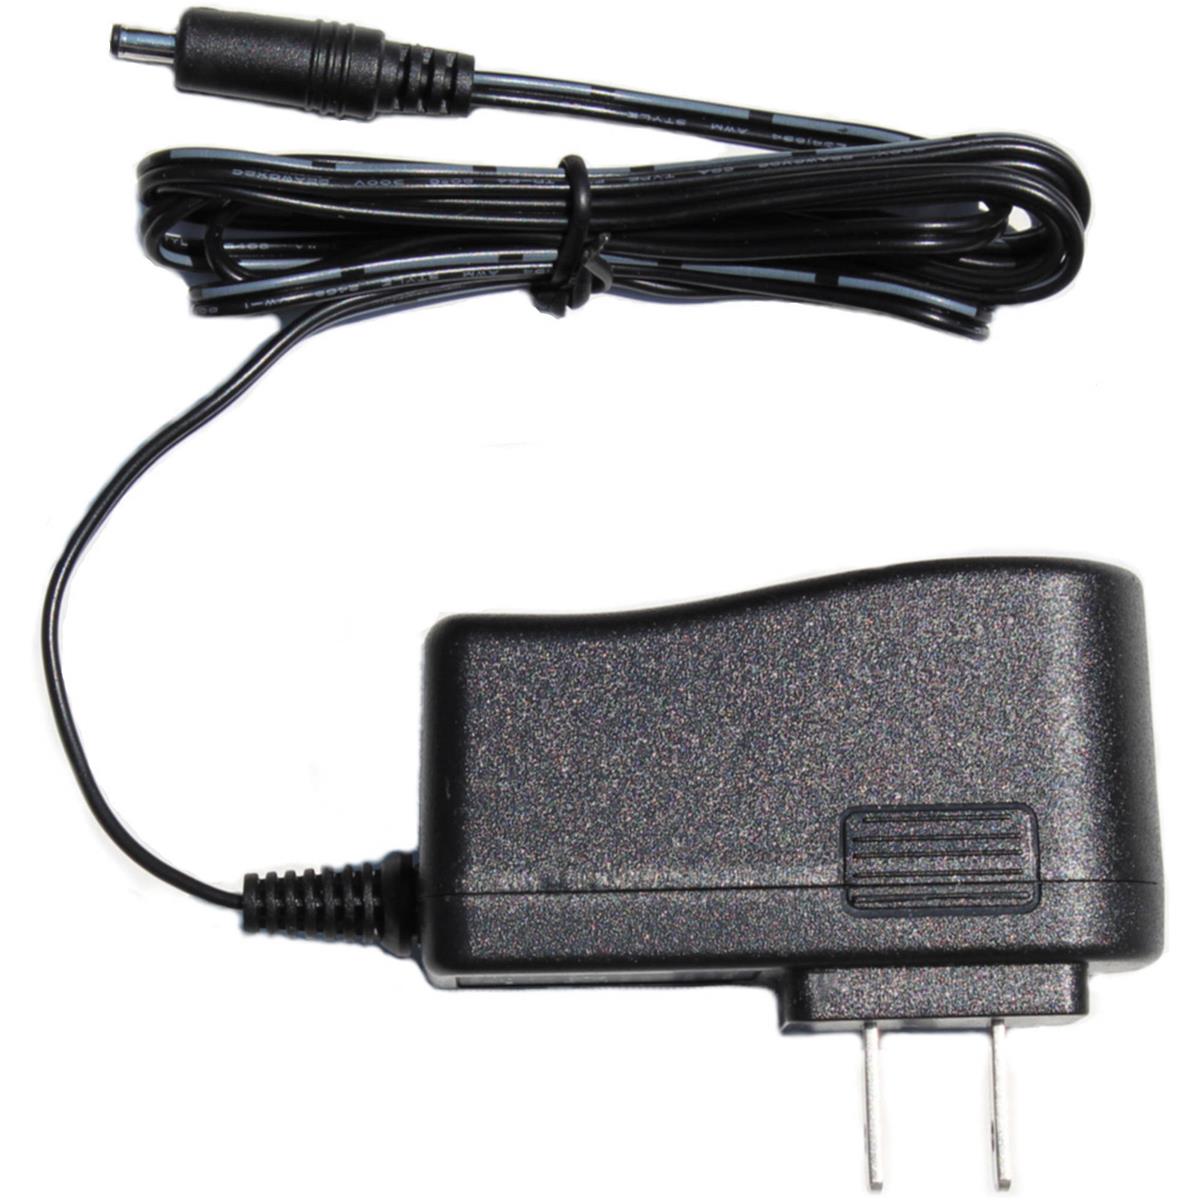 Image of Aurora Multimedia 24V DC Power Supply with Europe Adapter